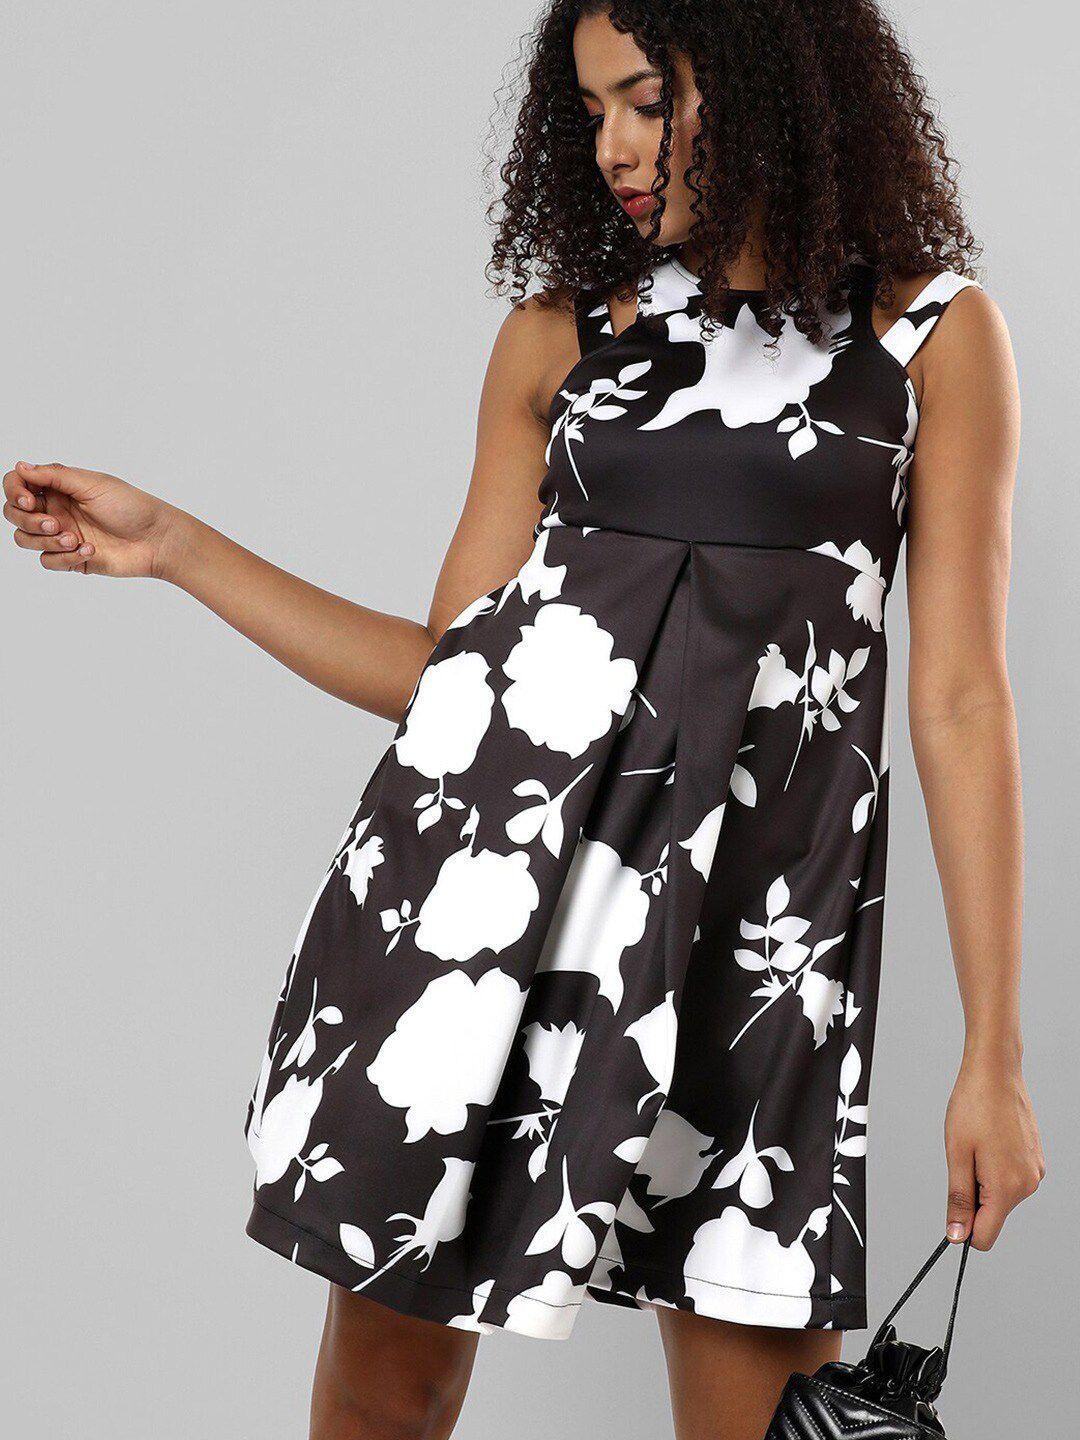 campus sutra black floral print fit & flare dress